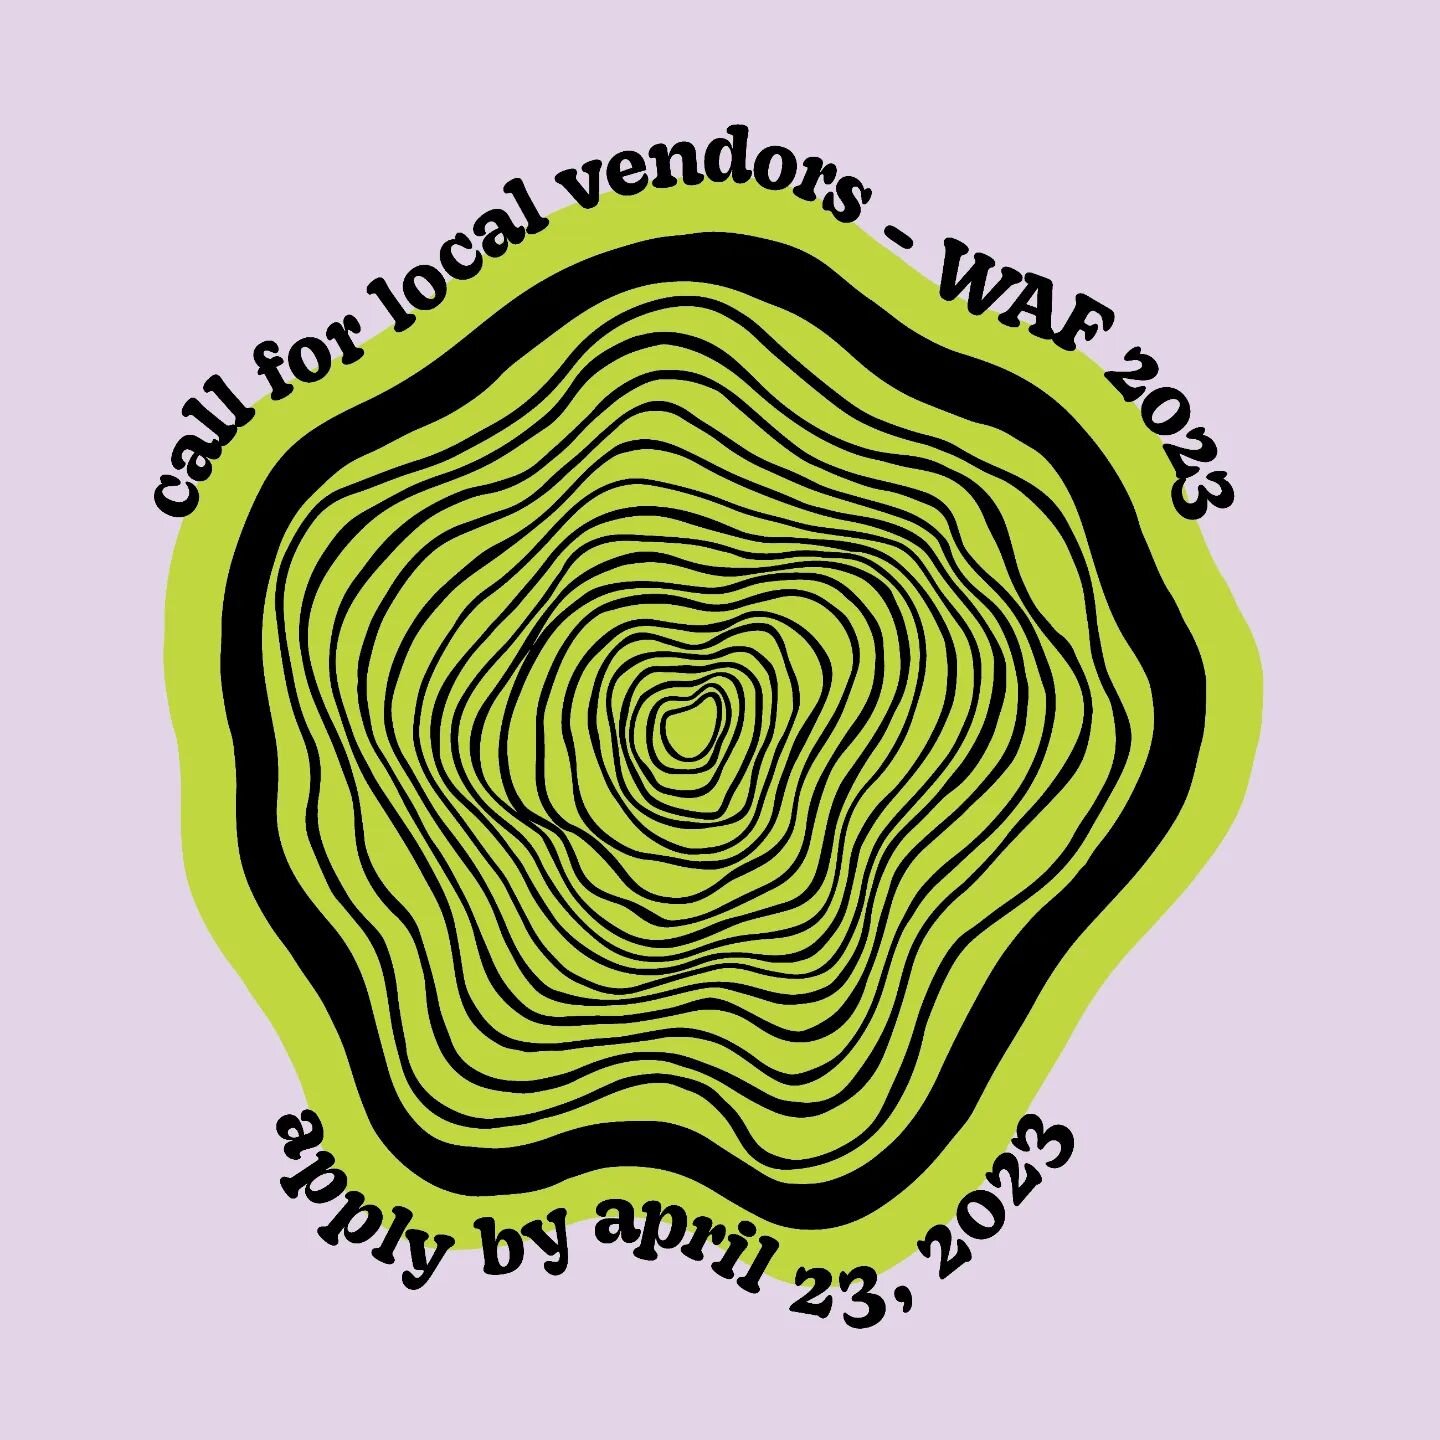 🎉🎉Call for Vendors🎉🎉

Join us at the 40th Annual Women's Art Festival on August 12&amp;13, 2023! 

We are now accepting applications for artist booths and food vendors! Visit the link in our bio for more info!

#artfestival #art #festival #artist